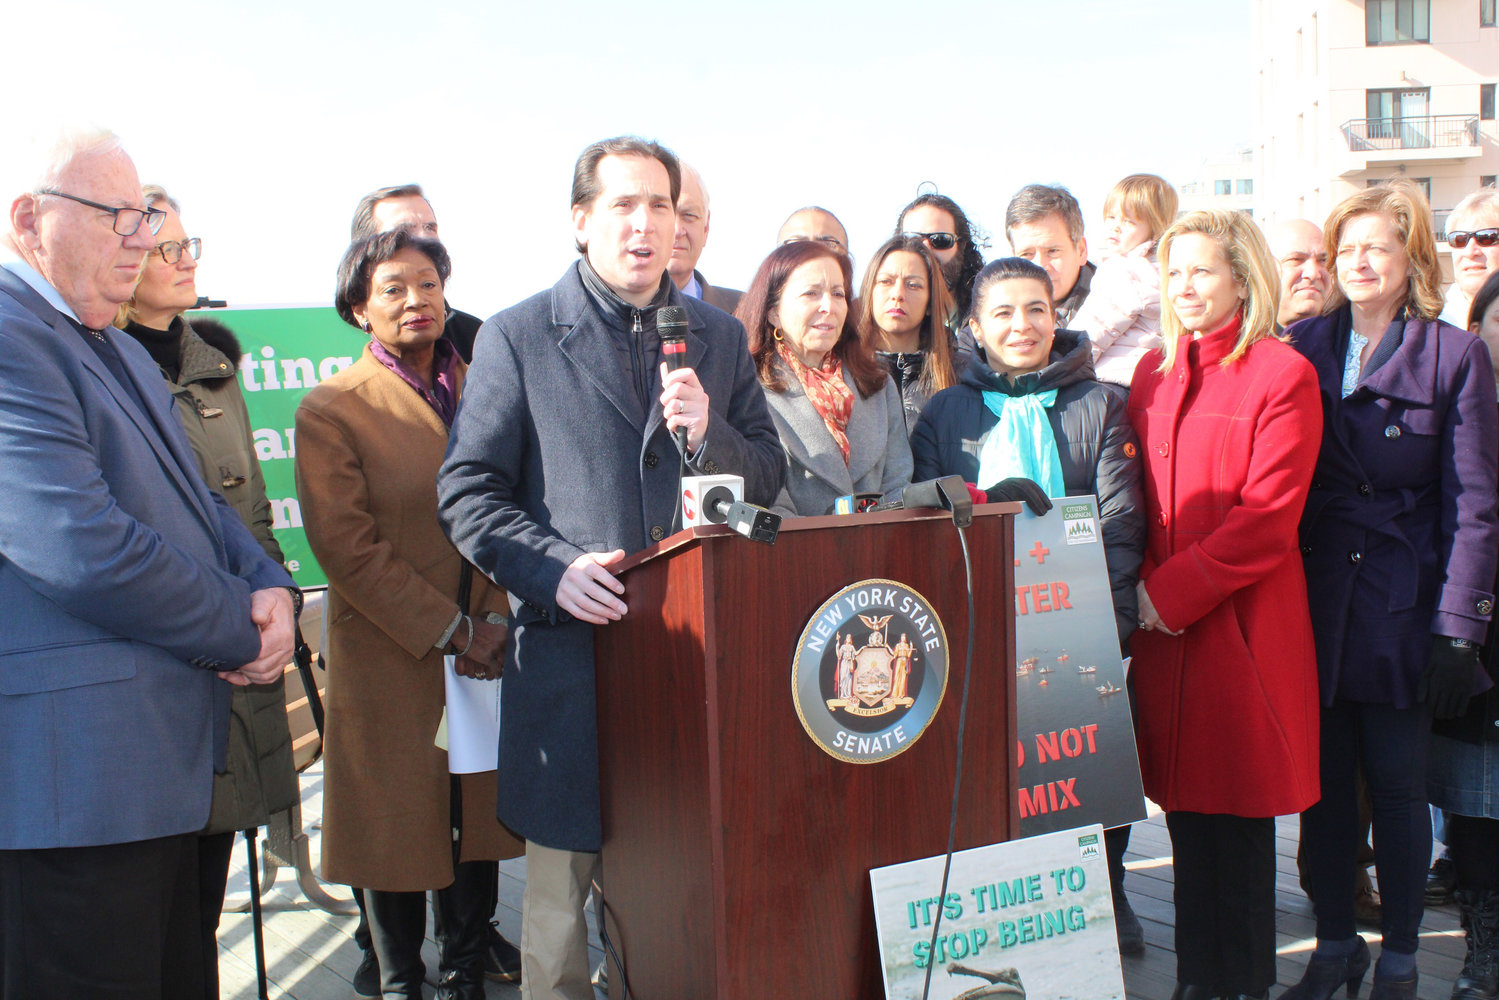 State Sen. Todd Kaminsky held a news conference on Sunday on the boardwalk, where he announced that a bill that he sponsored to ban offshore drilling was expected to pass in the State Legislature.